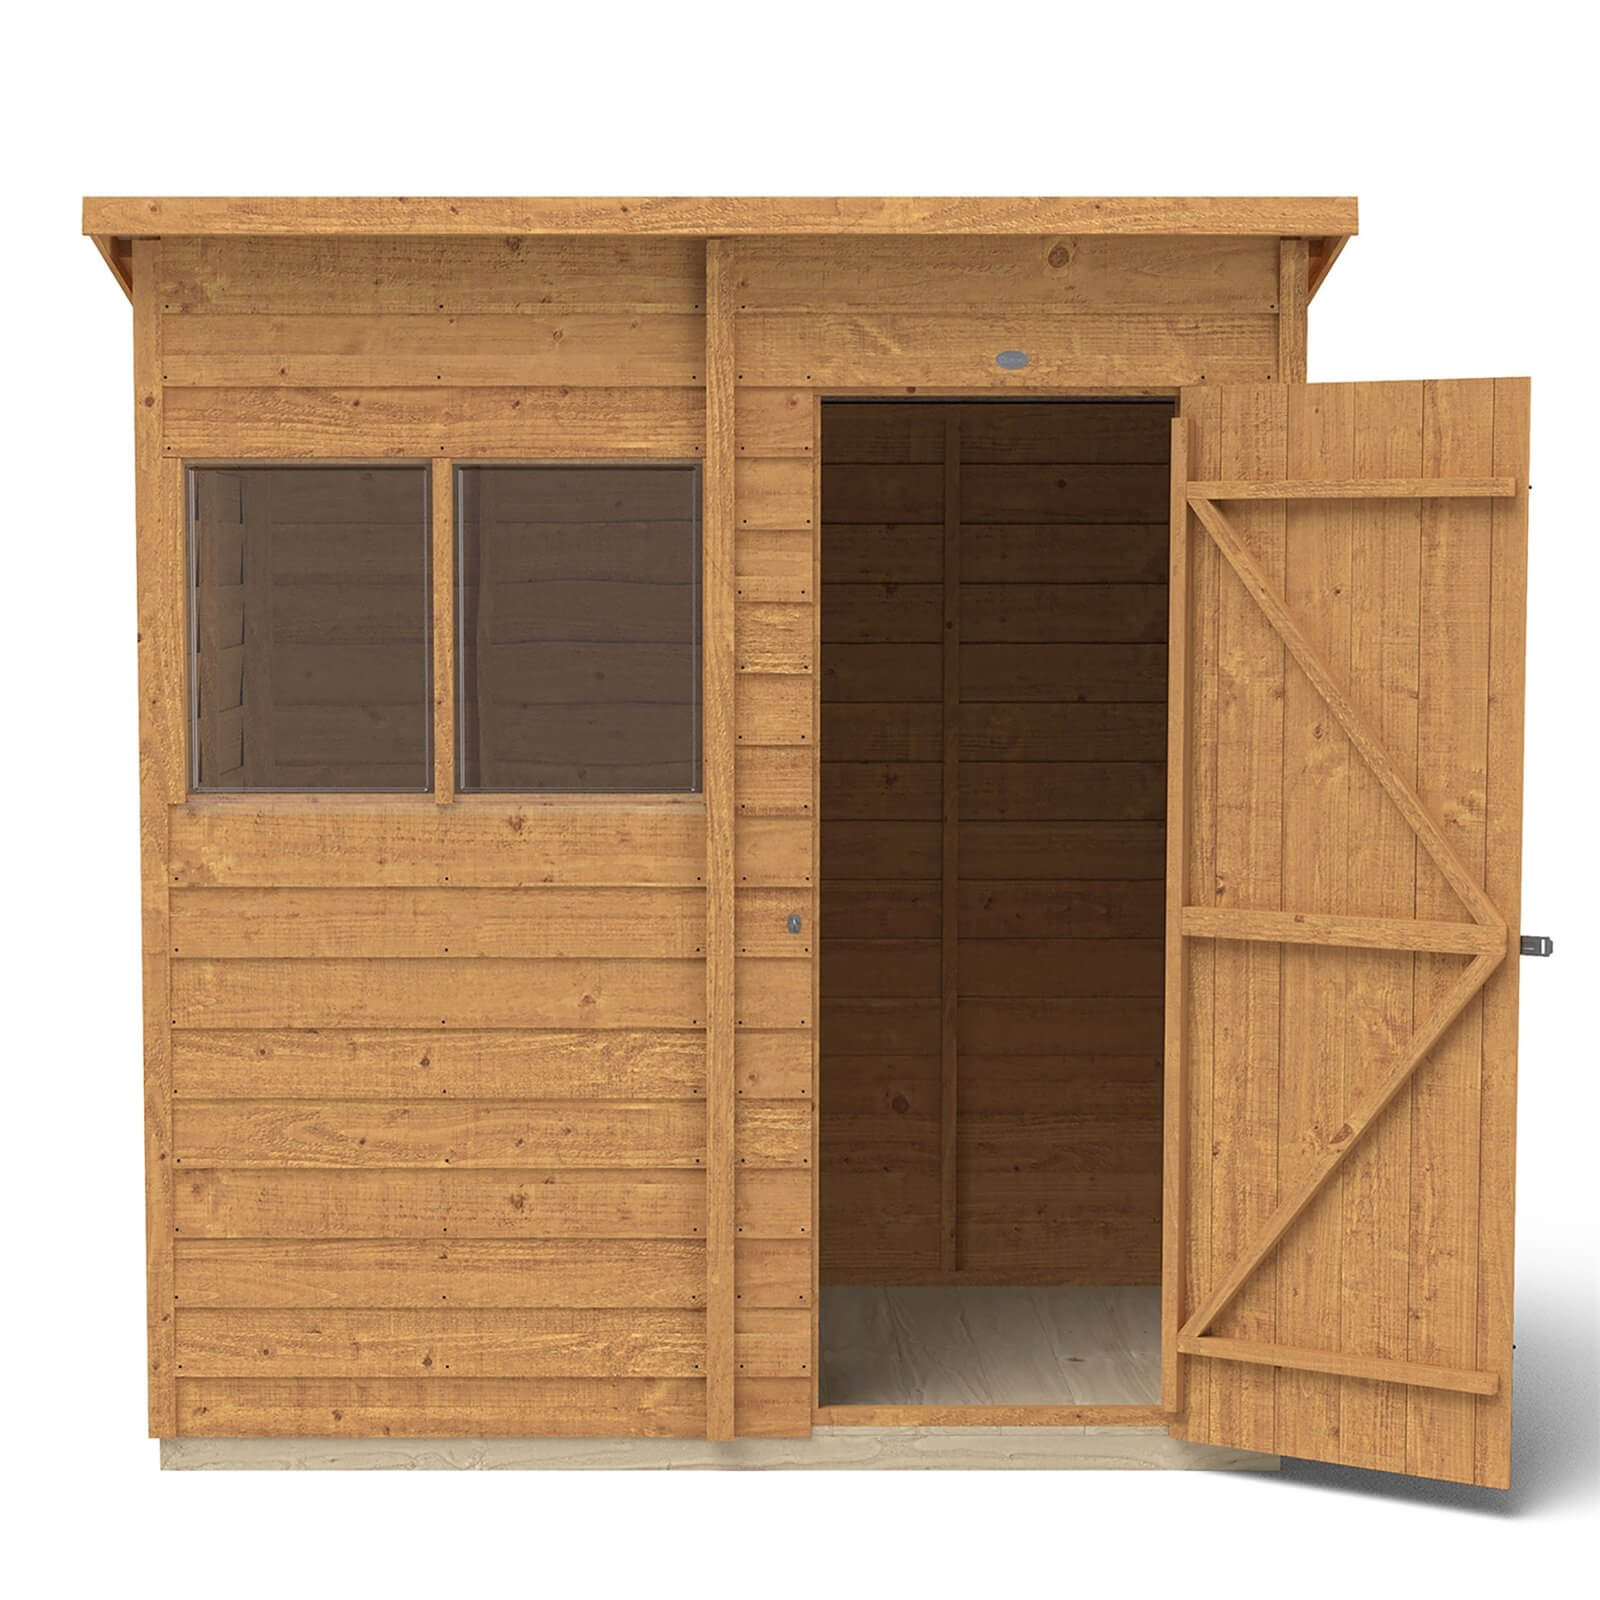 Forest 6 x 4ft Overlap Dip Treated Pent Shed - incl. Installation